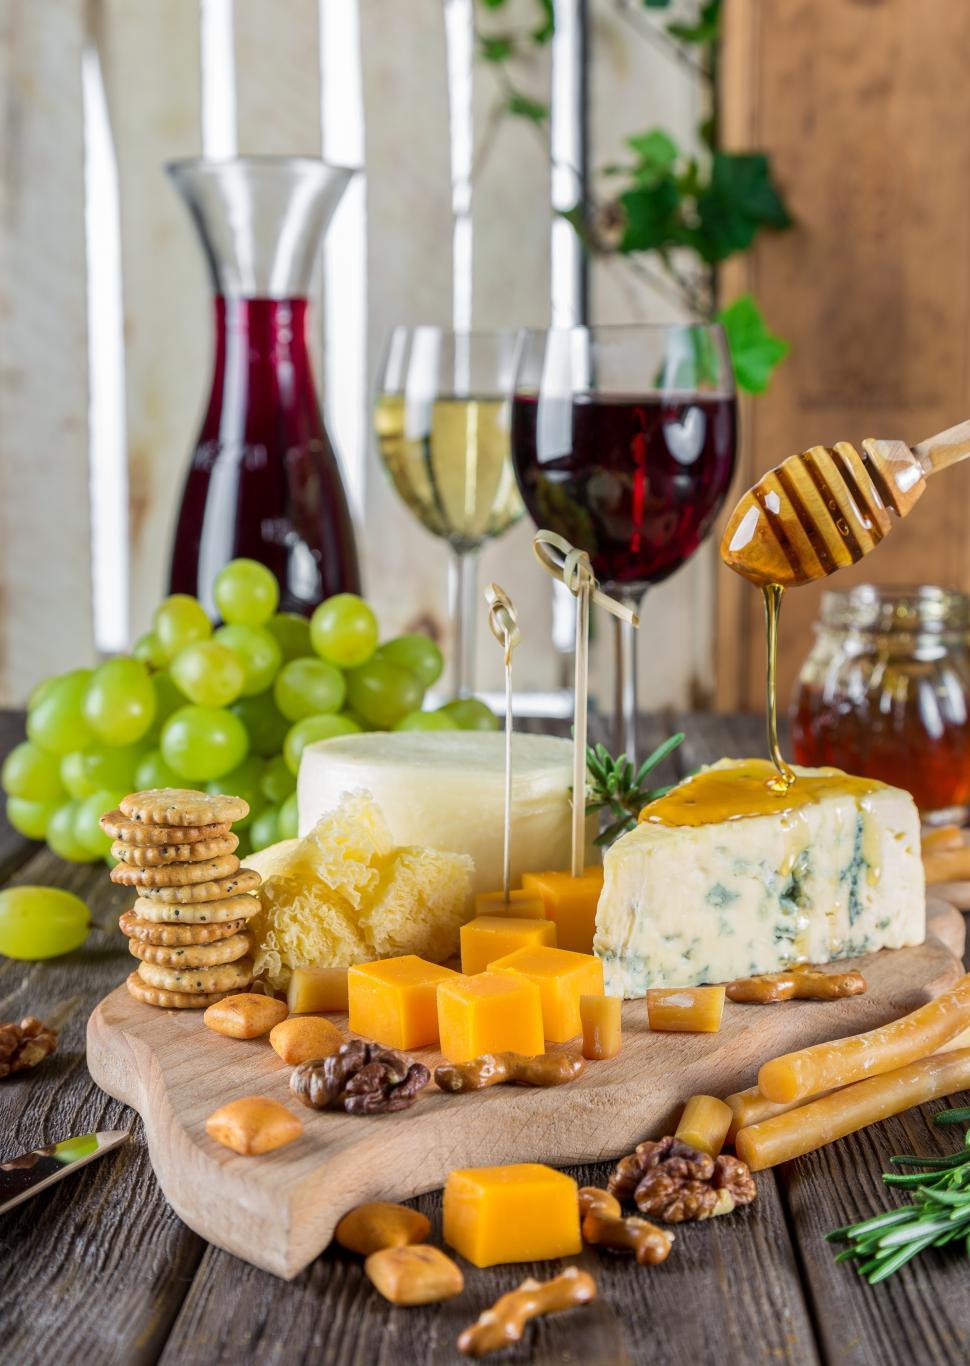 Free Image of Cheese Plate 